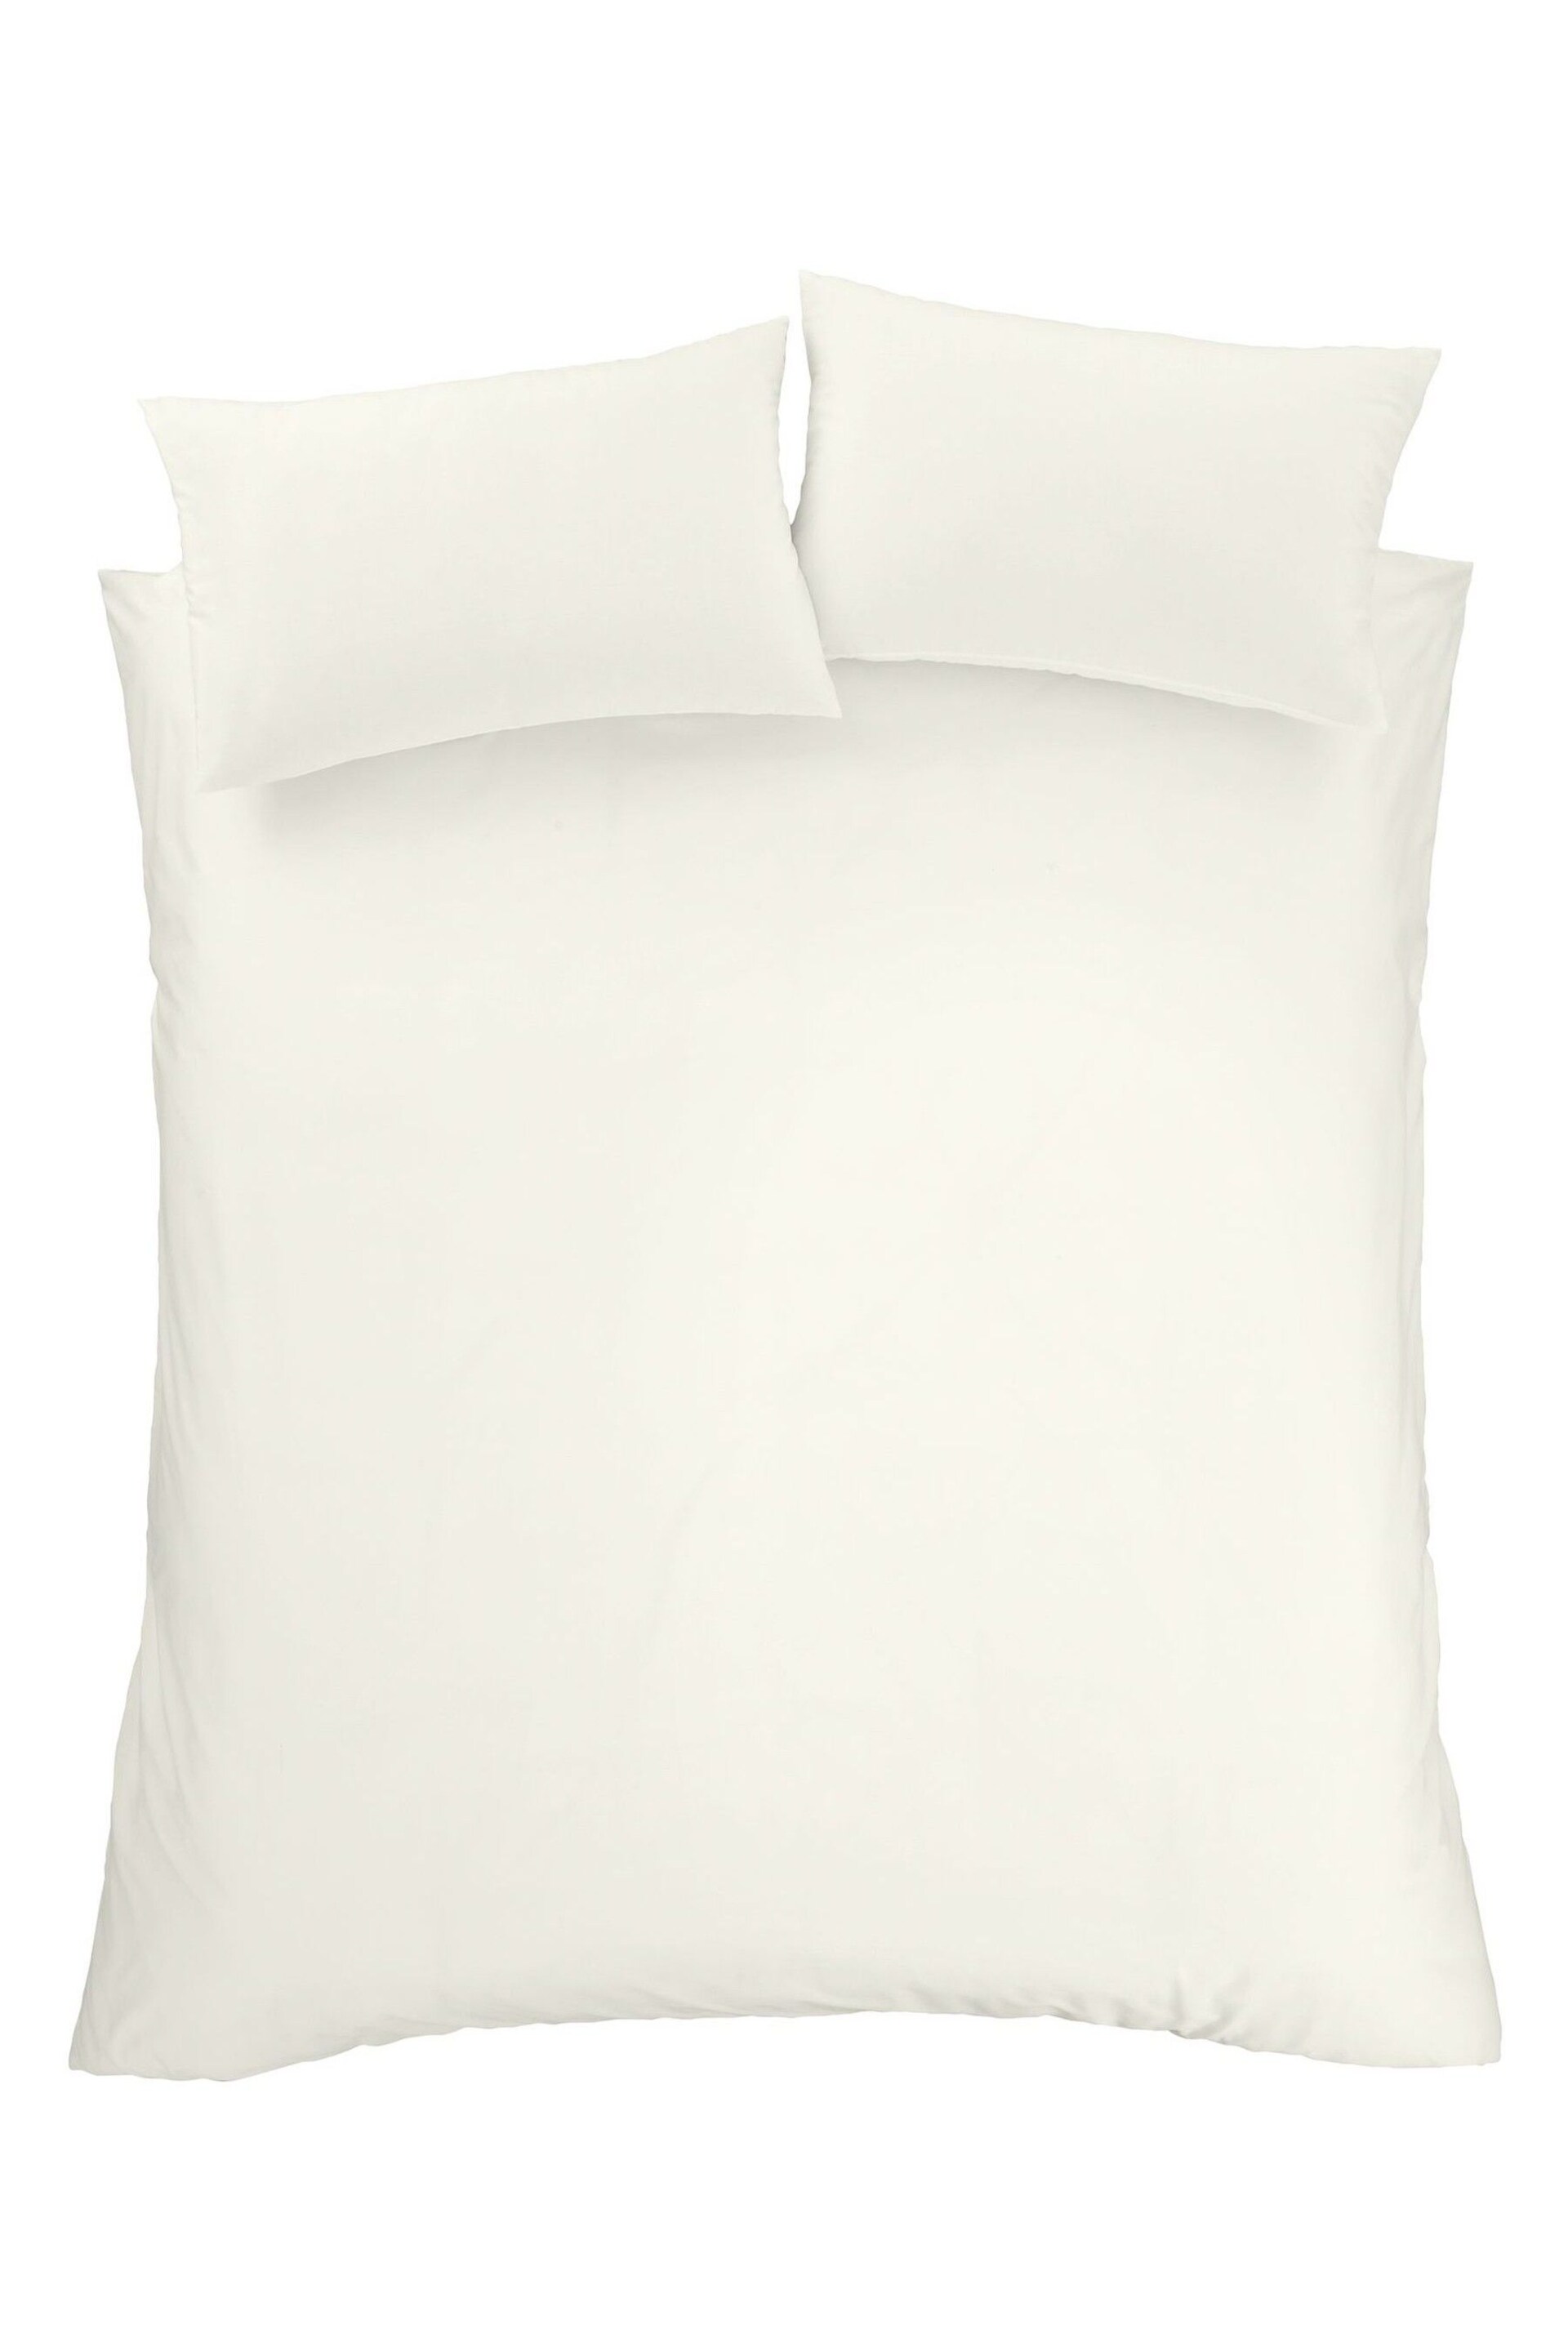 Bianca Cream 180 Thread Count Egyptian Cotton Duvet Cover - Image 4 of 4